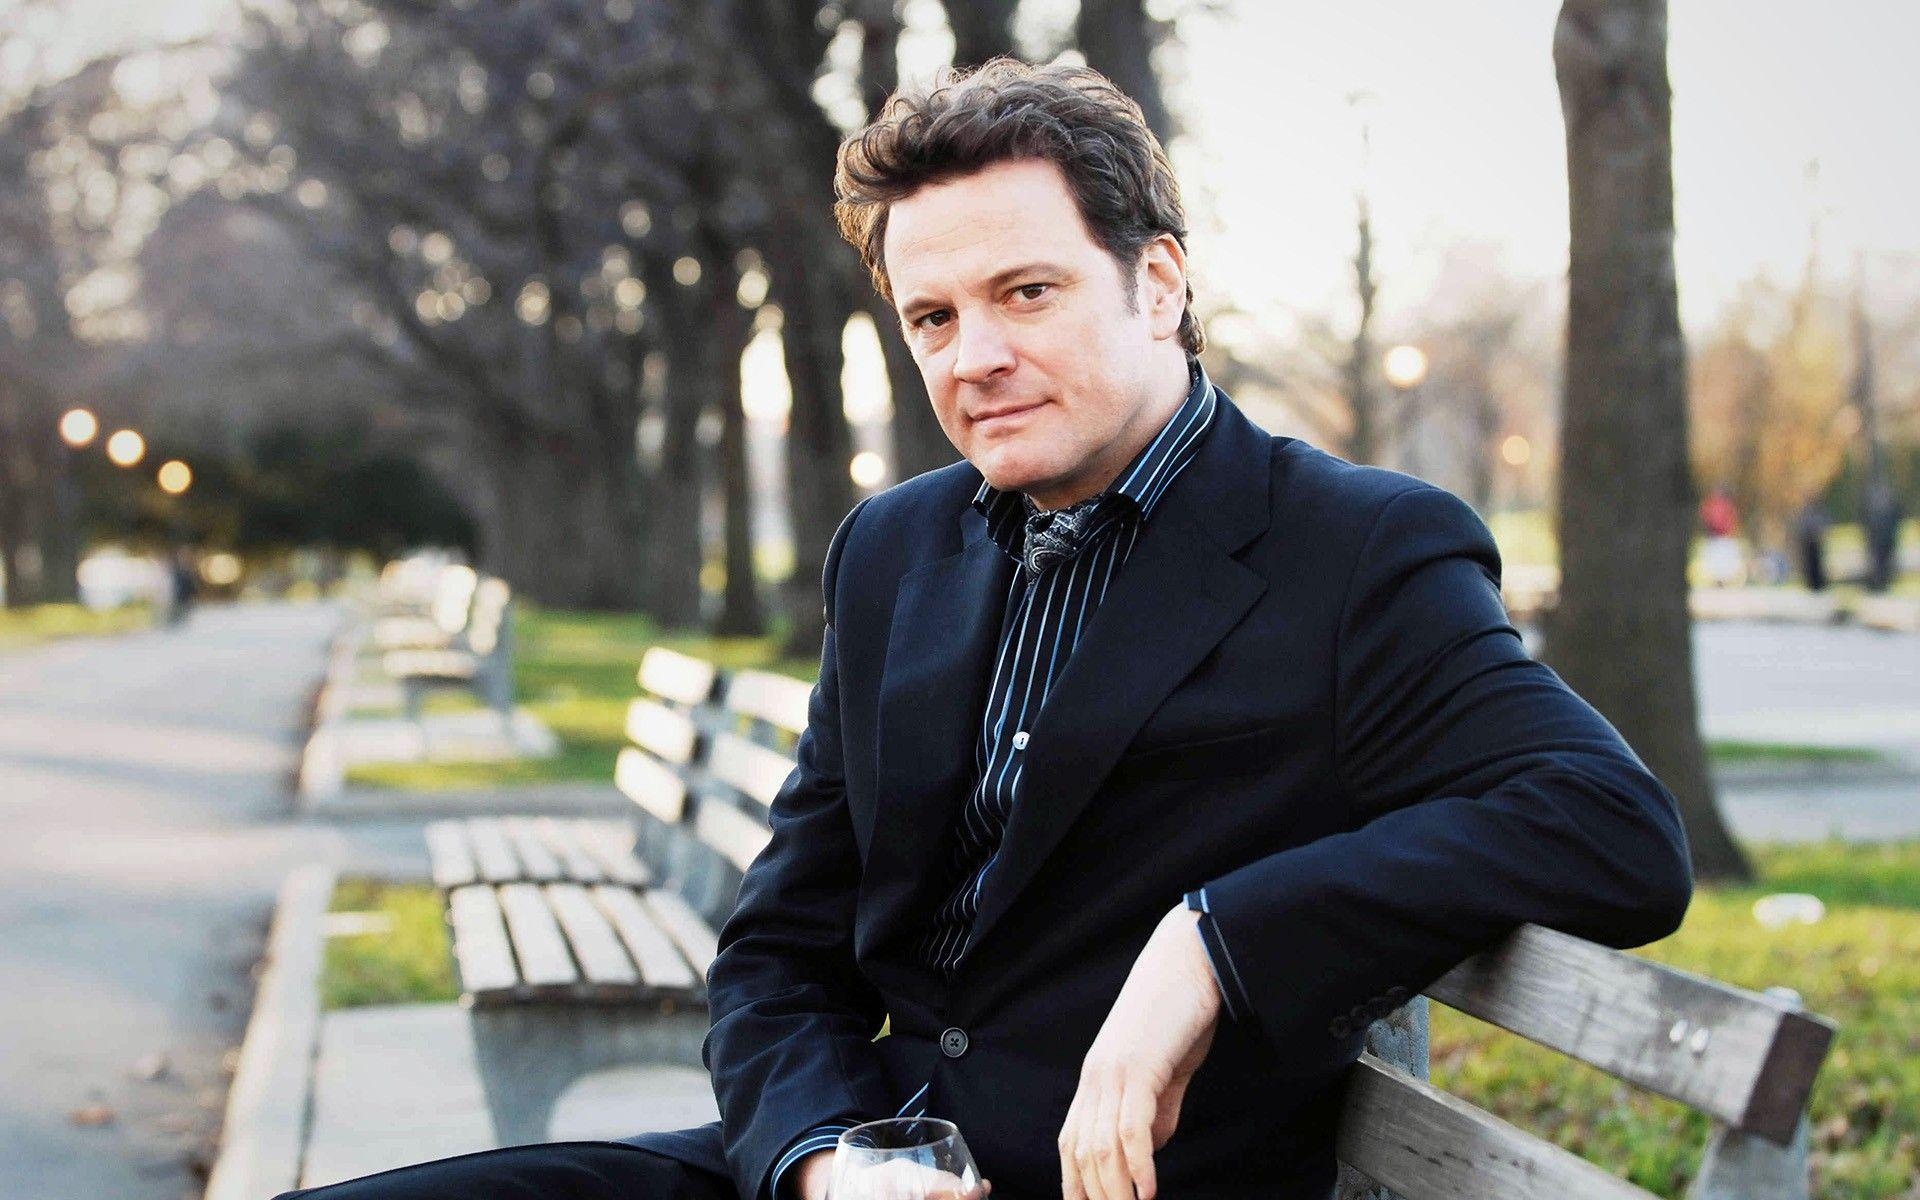 Colin Firth, Top wallpapers, Firth backgrounds, 1920x1200 HD Desktop